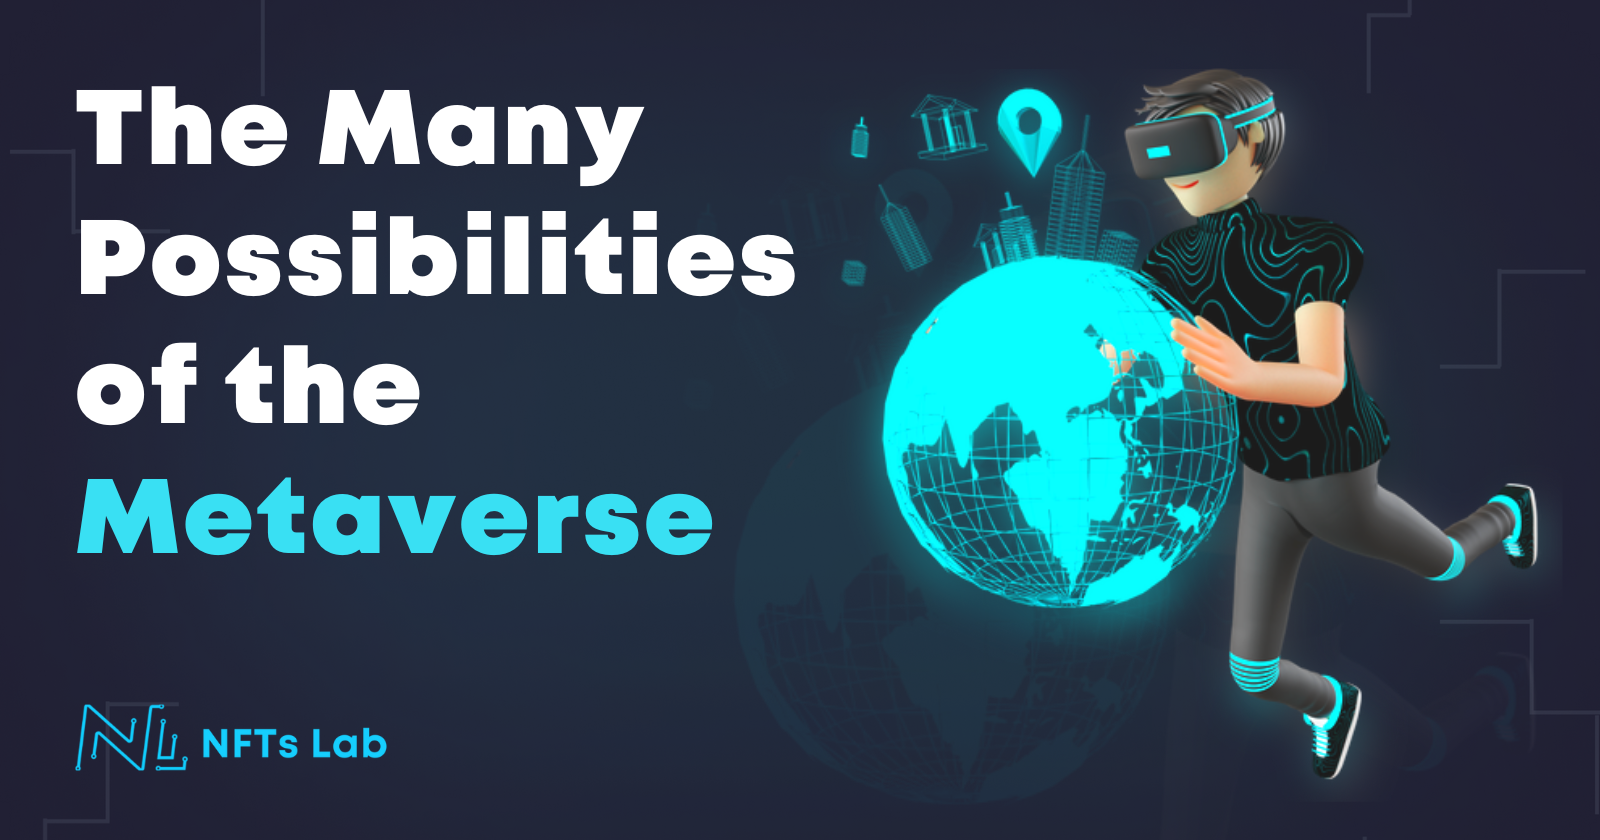 The Many Possibilities of the Metaverse